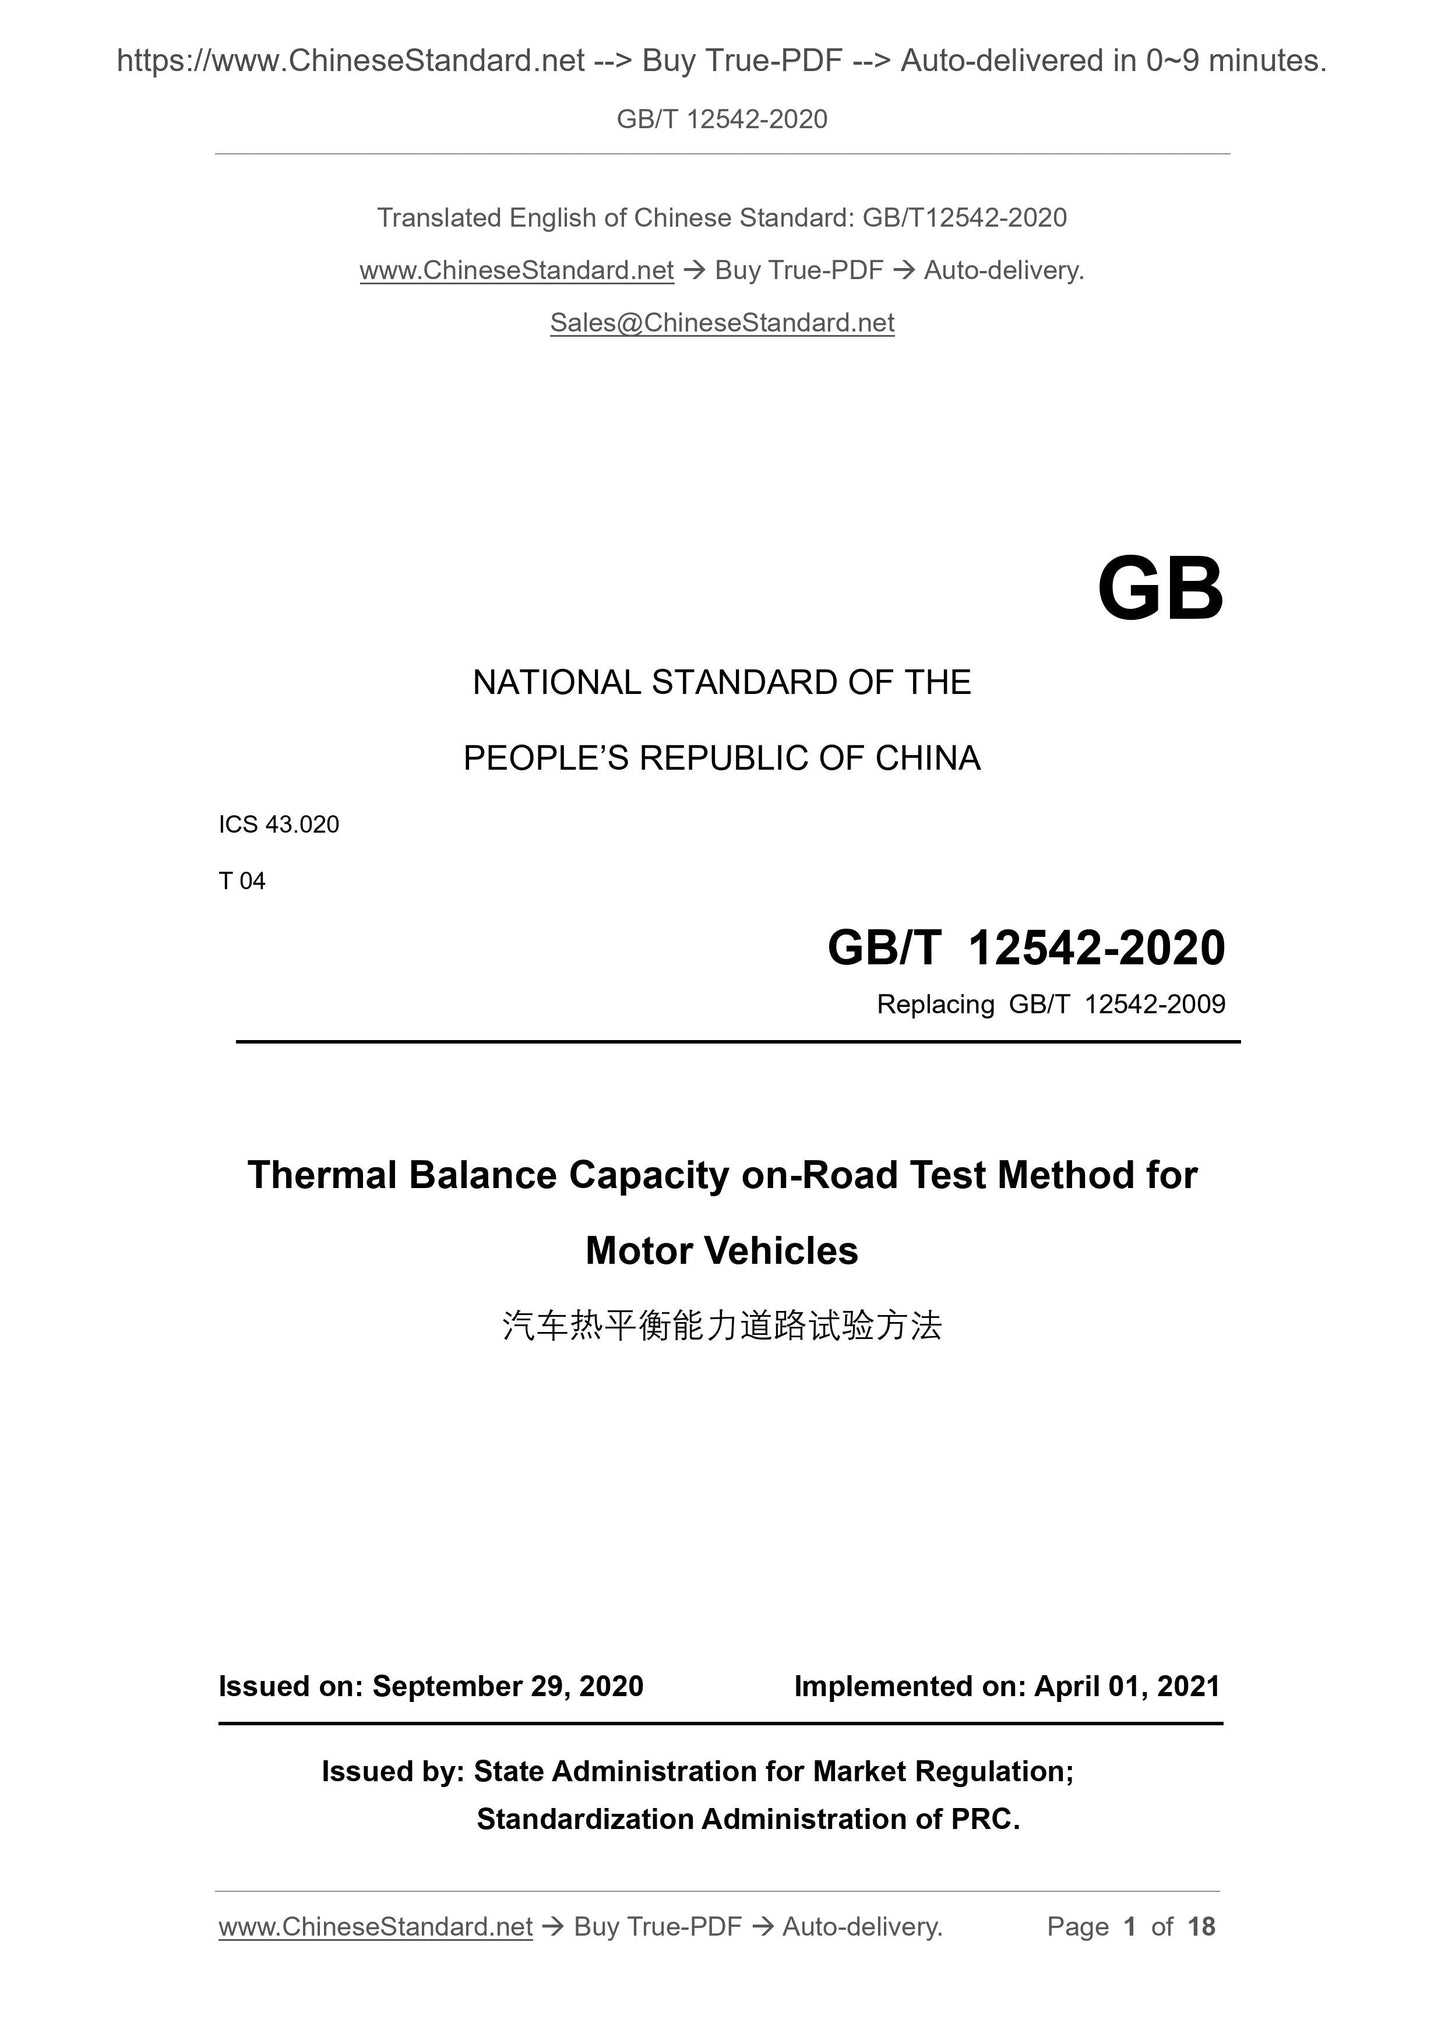 GB/T 12542-2020 Page 1